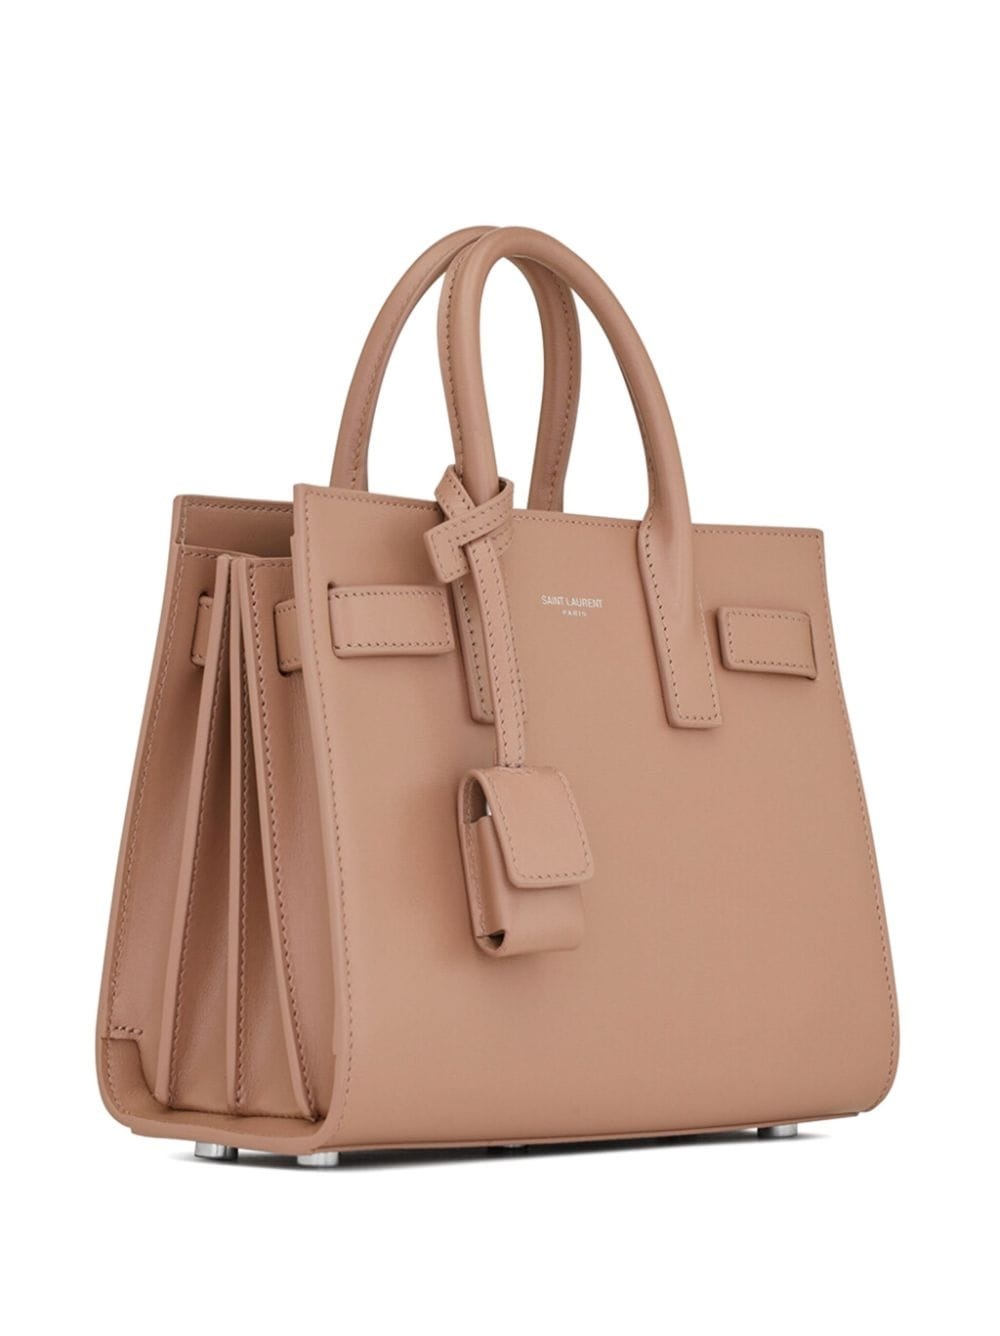 small Sac de Jour leather tote bag - 3